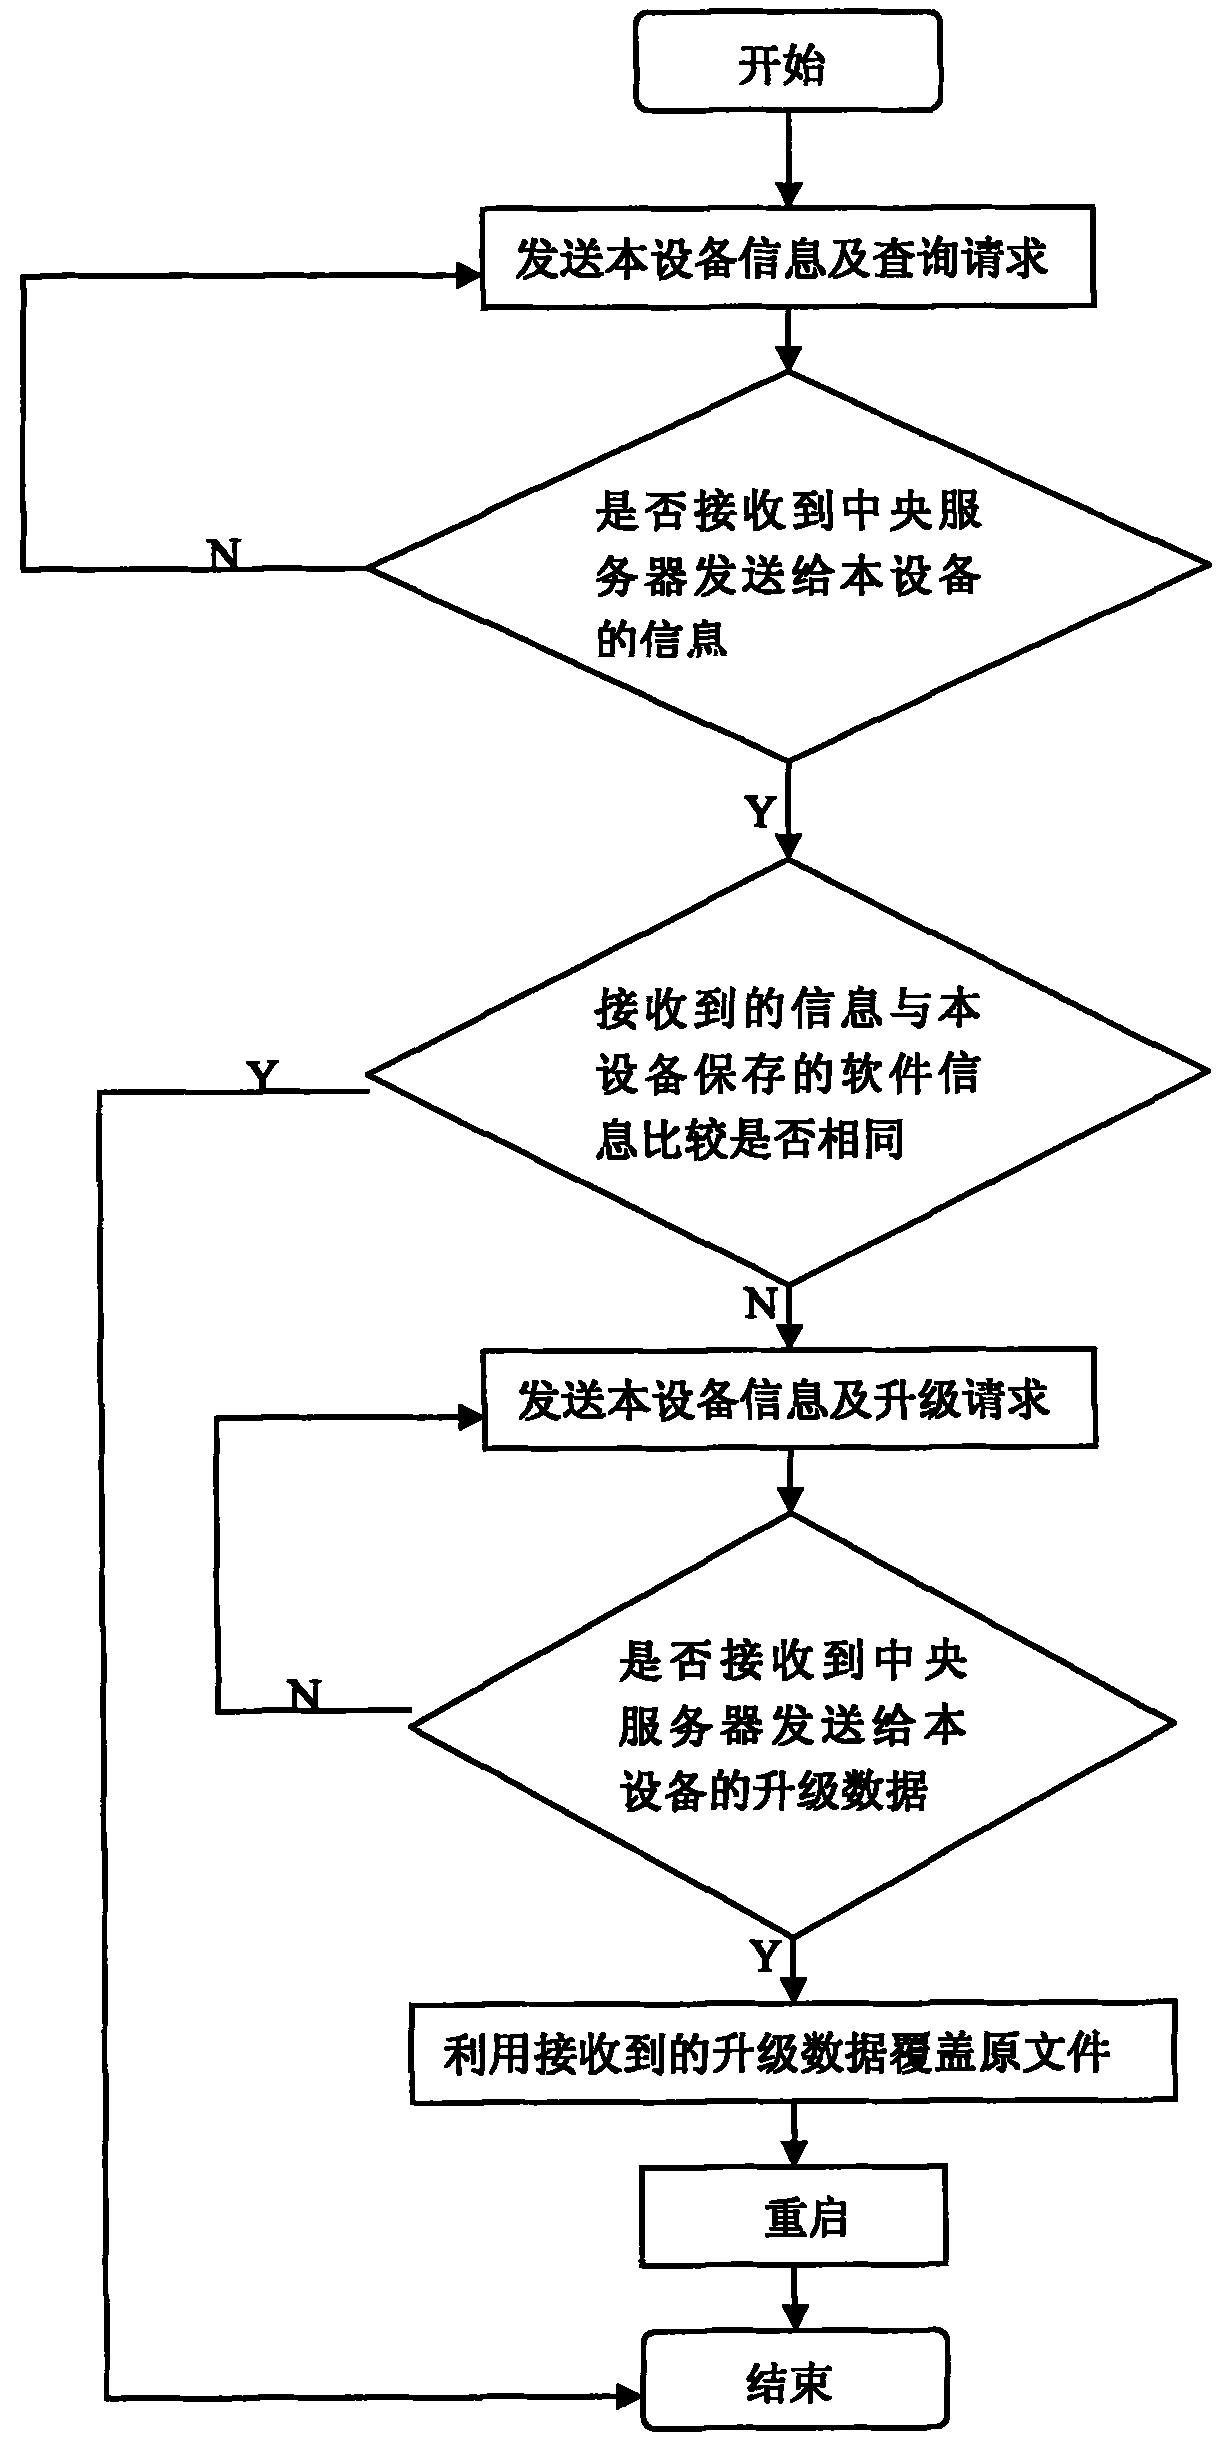 Remote automatic upgrading method for digital monitoring equipment